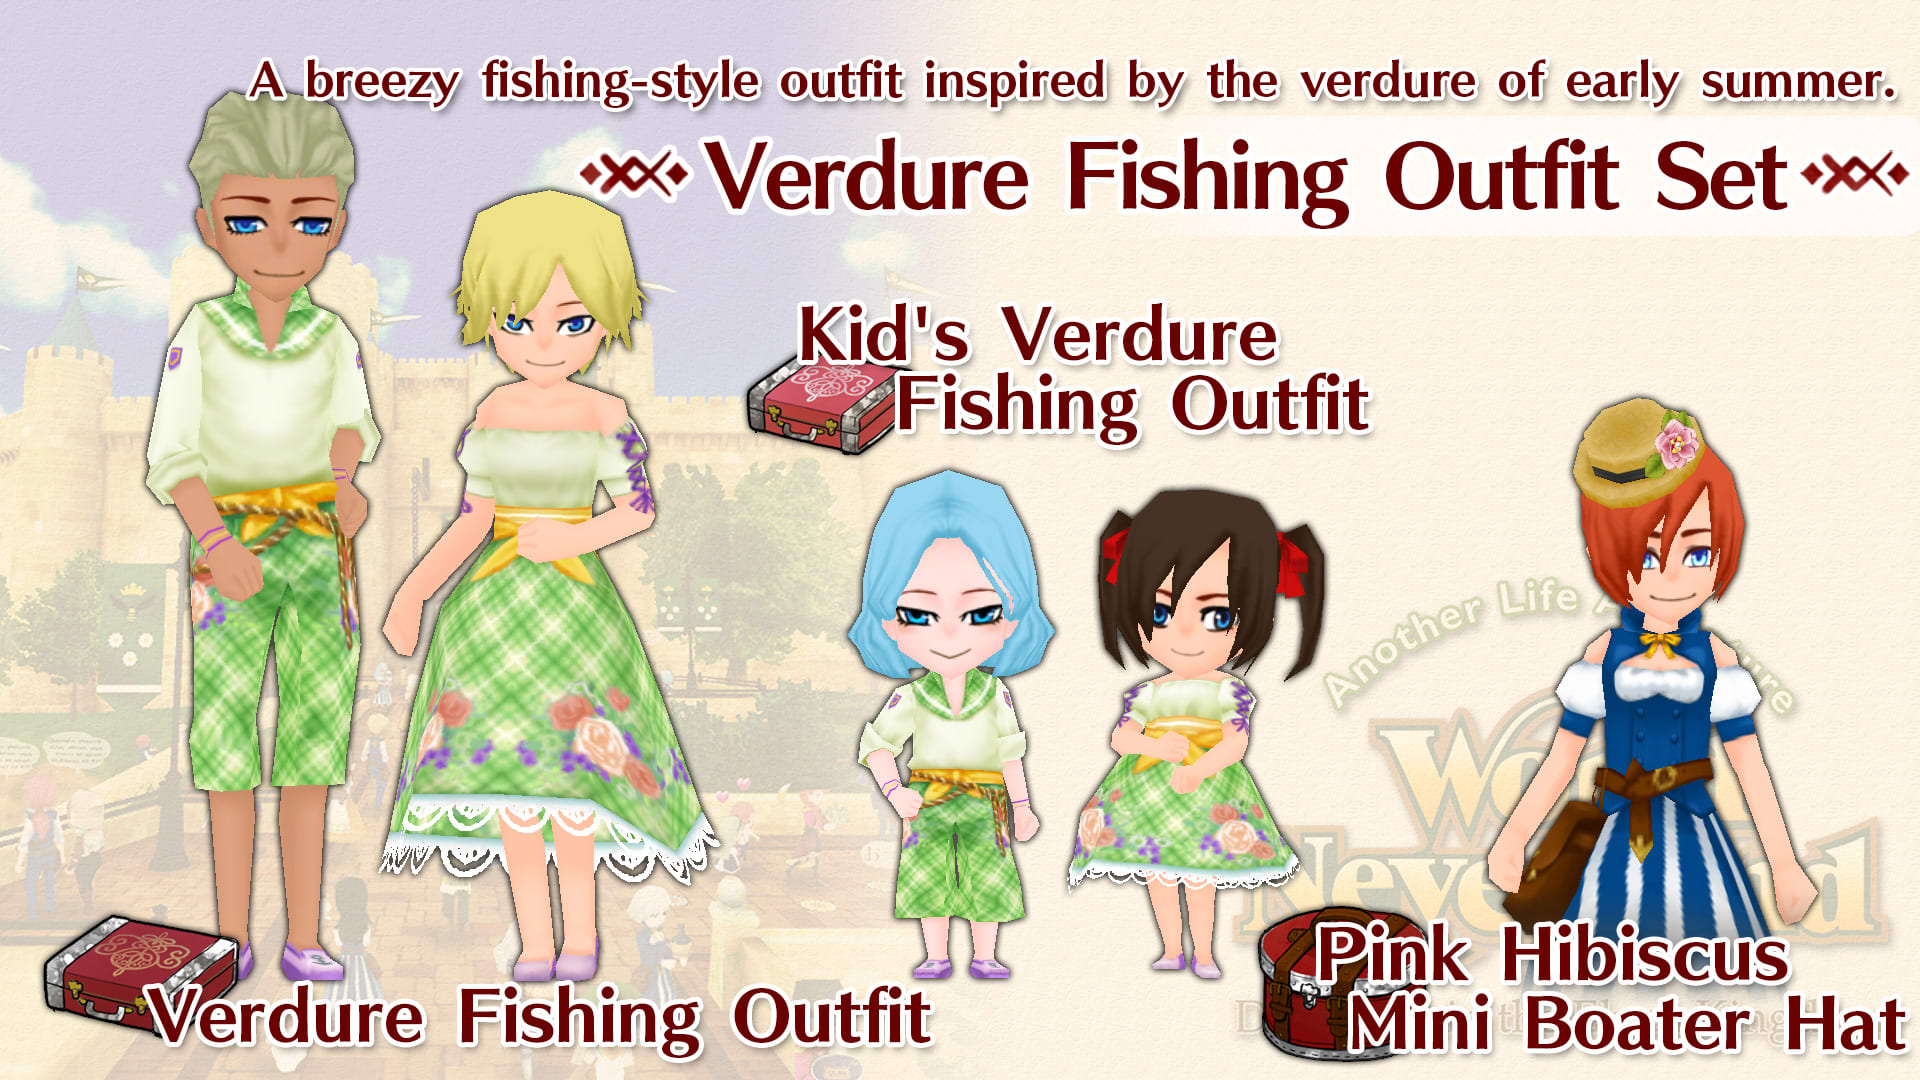 Verdure Fishing Outfit Set